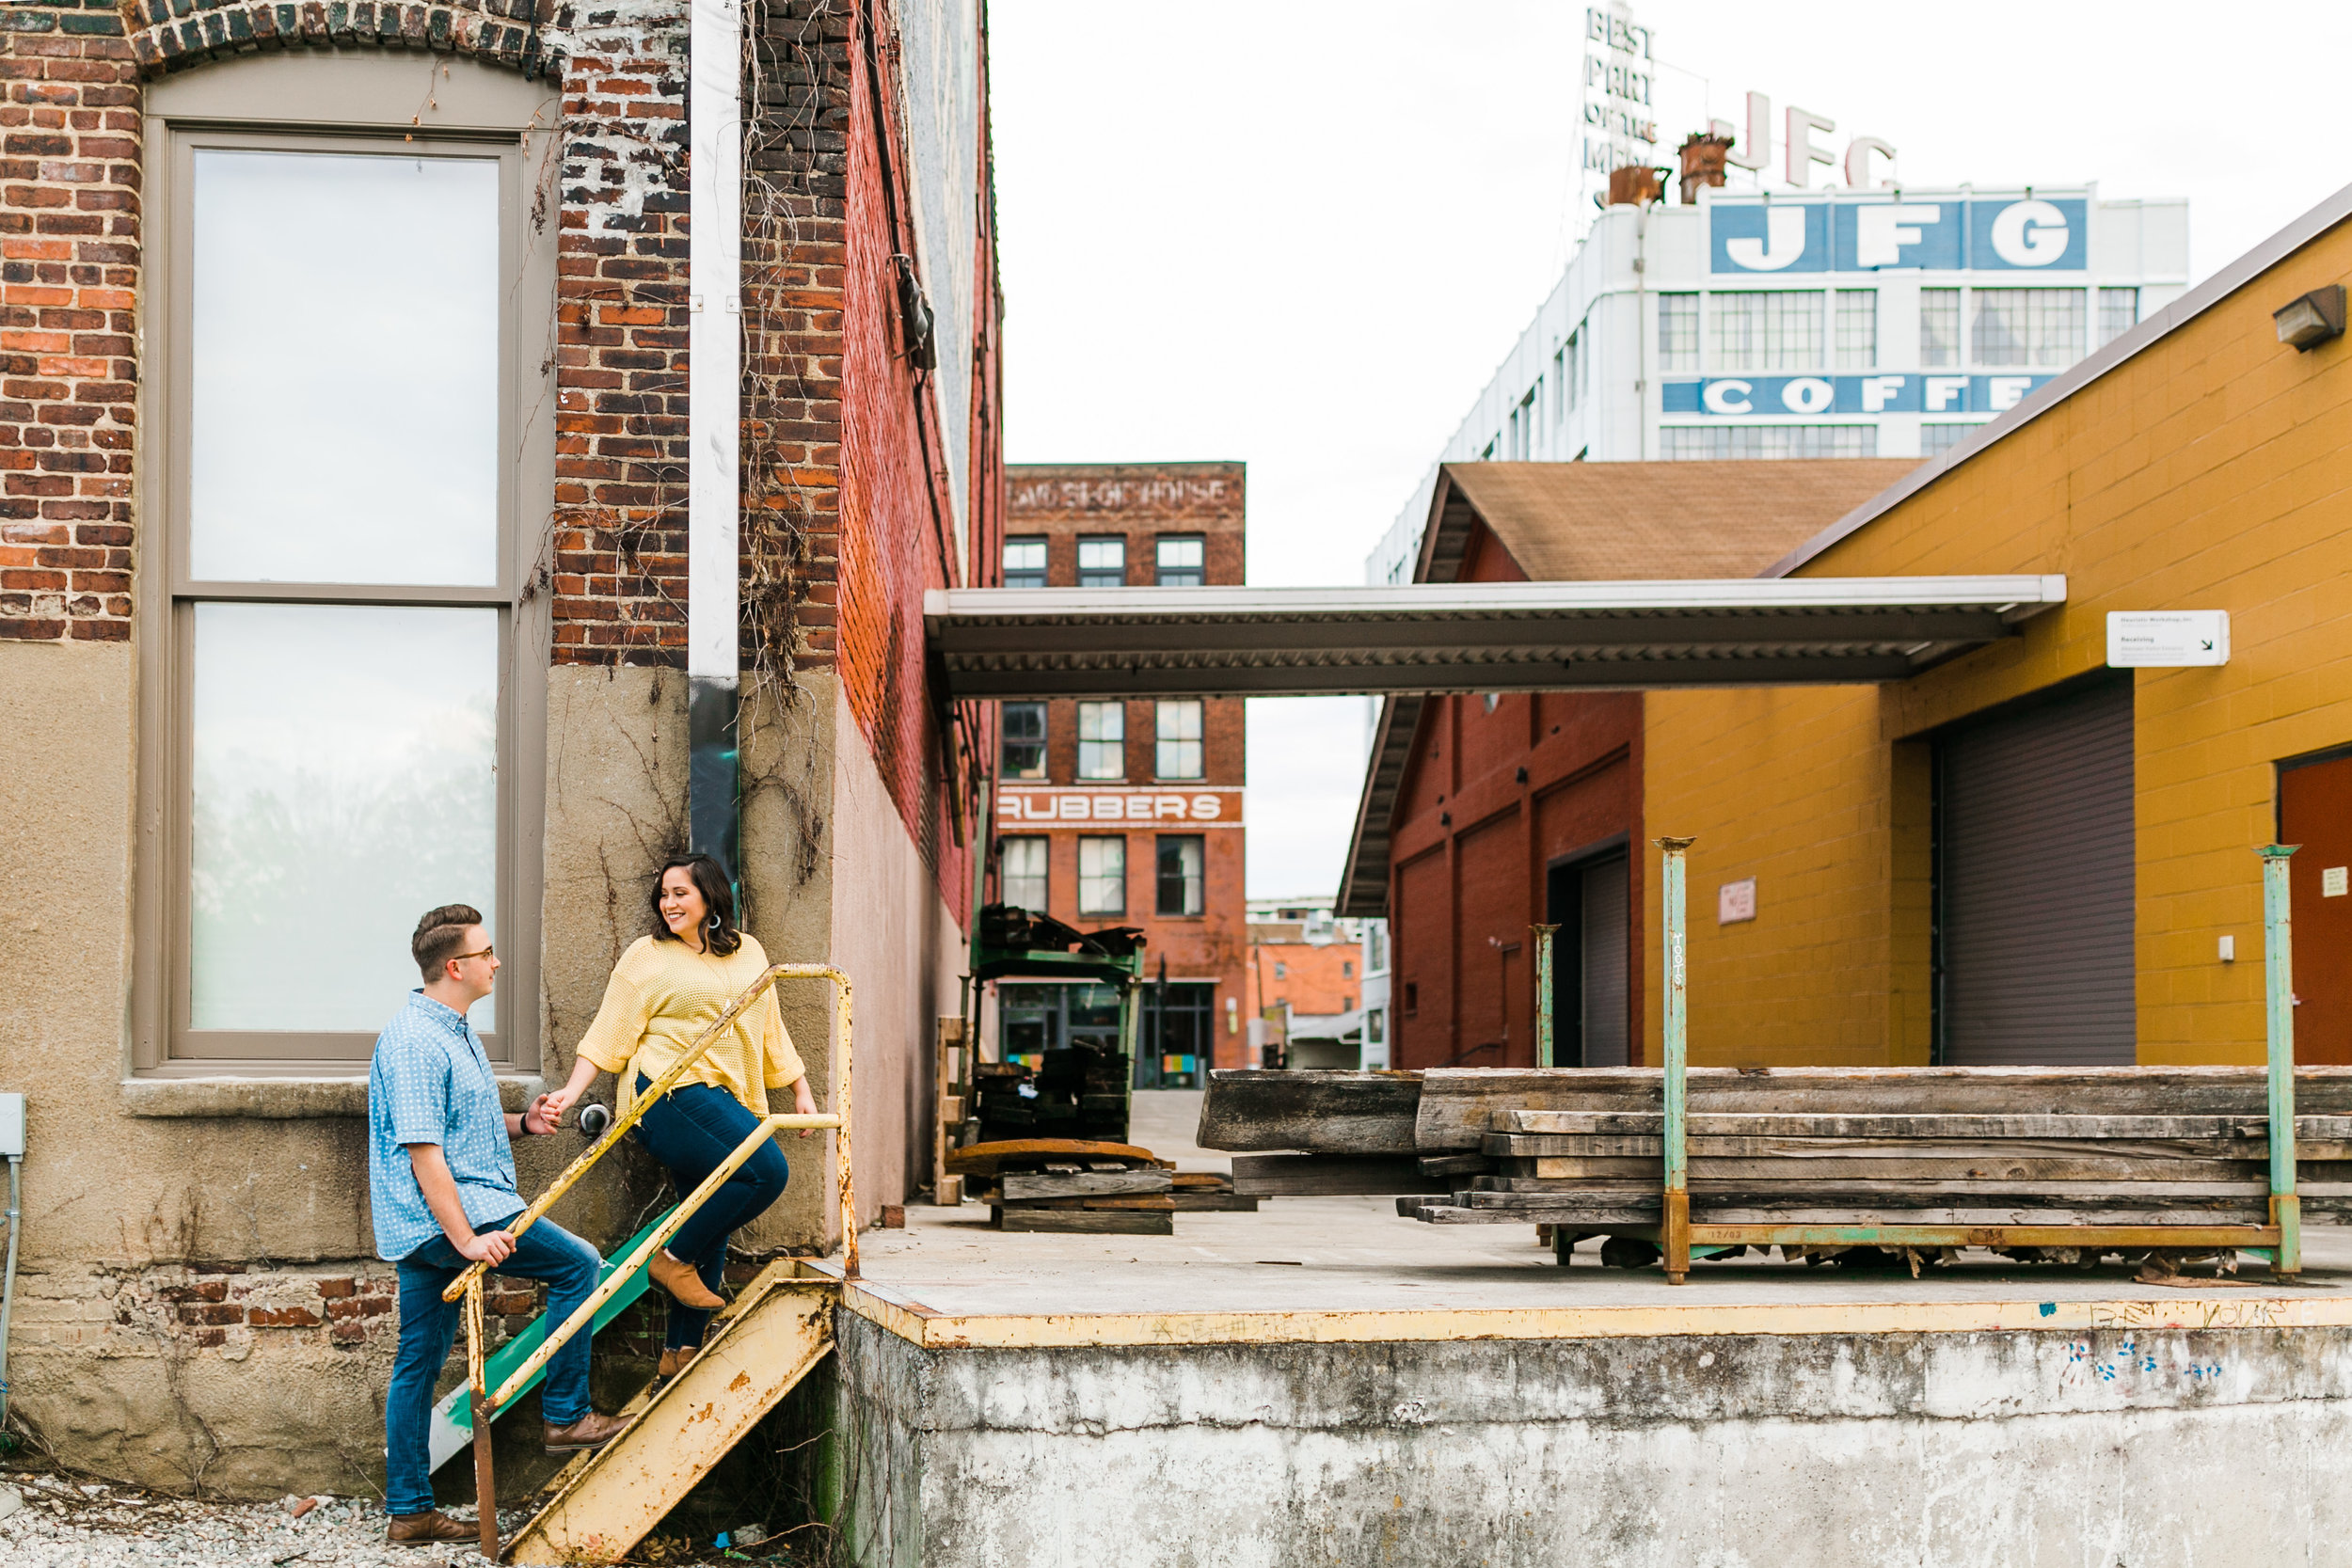 casual engagement session outfits beside traintracks and jfg building in the old city knoxville